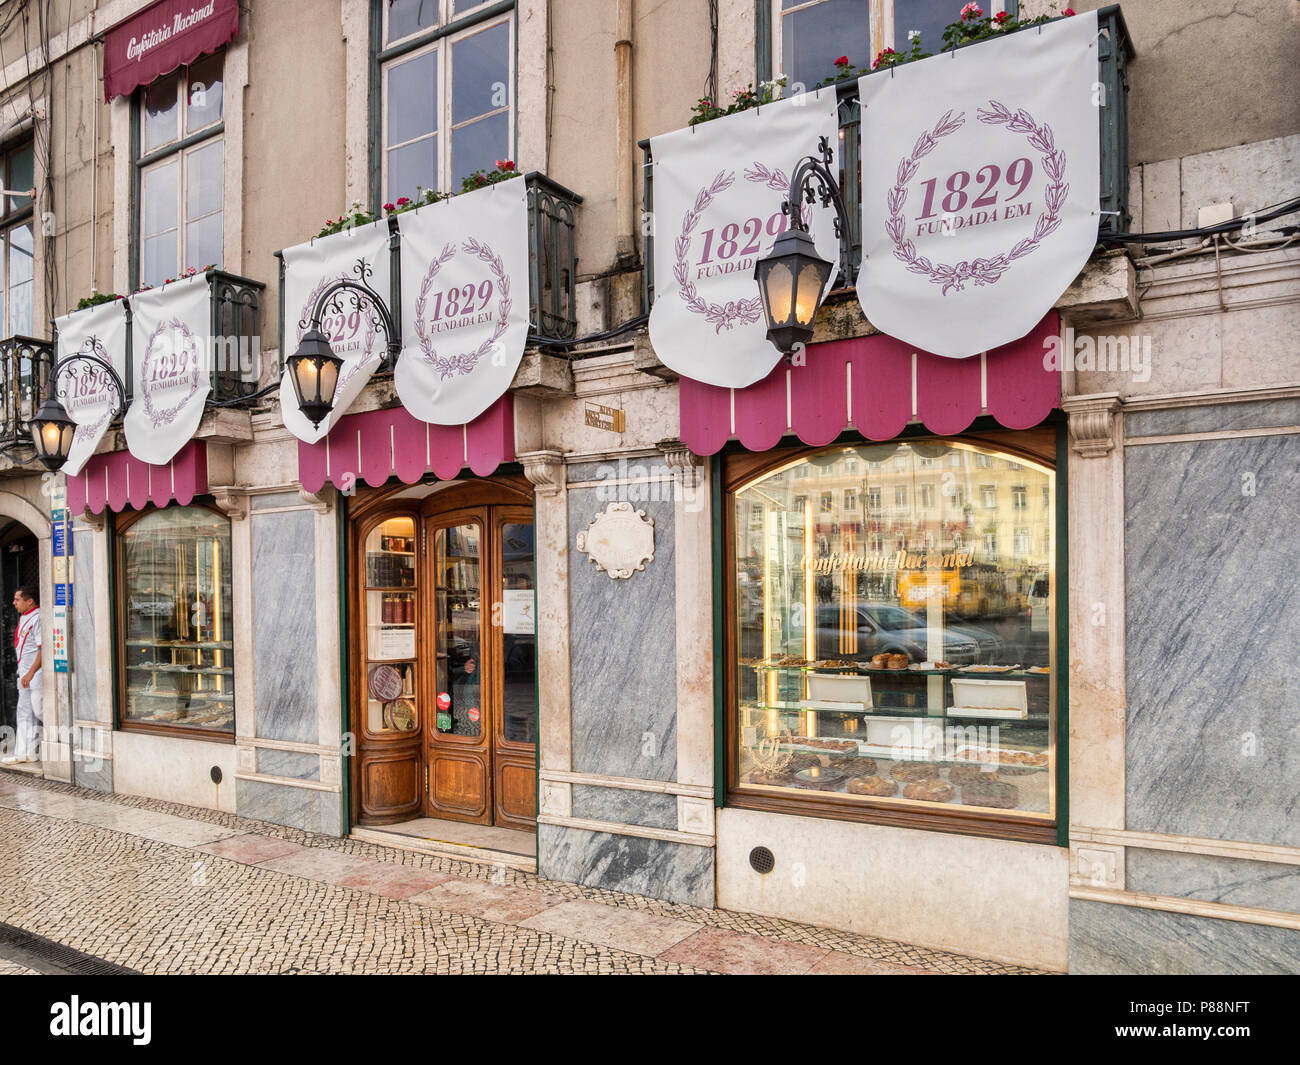 27 February 2018: Lisbon, Portugal - the Confeitaria Nacional, or National Pastry Shop, established in 1829, is considered to be the oldest in Lisbon. Stock Photo